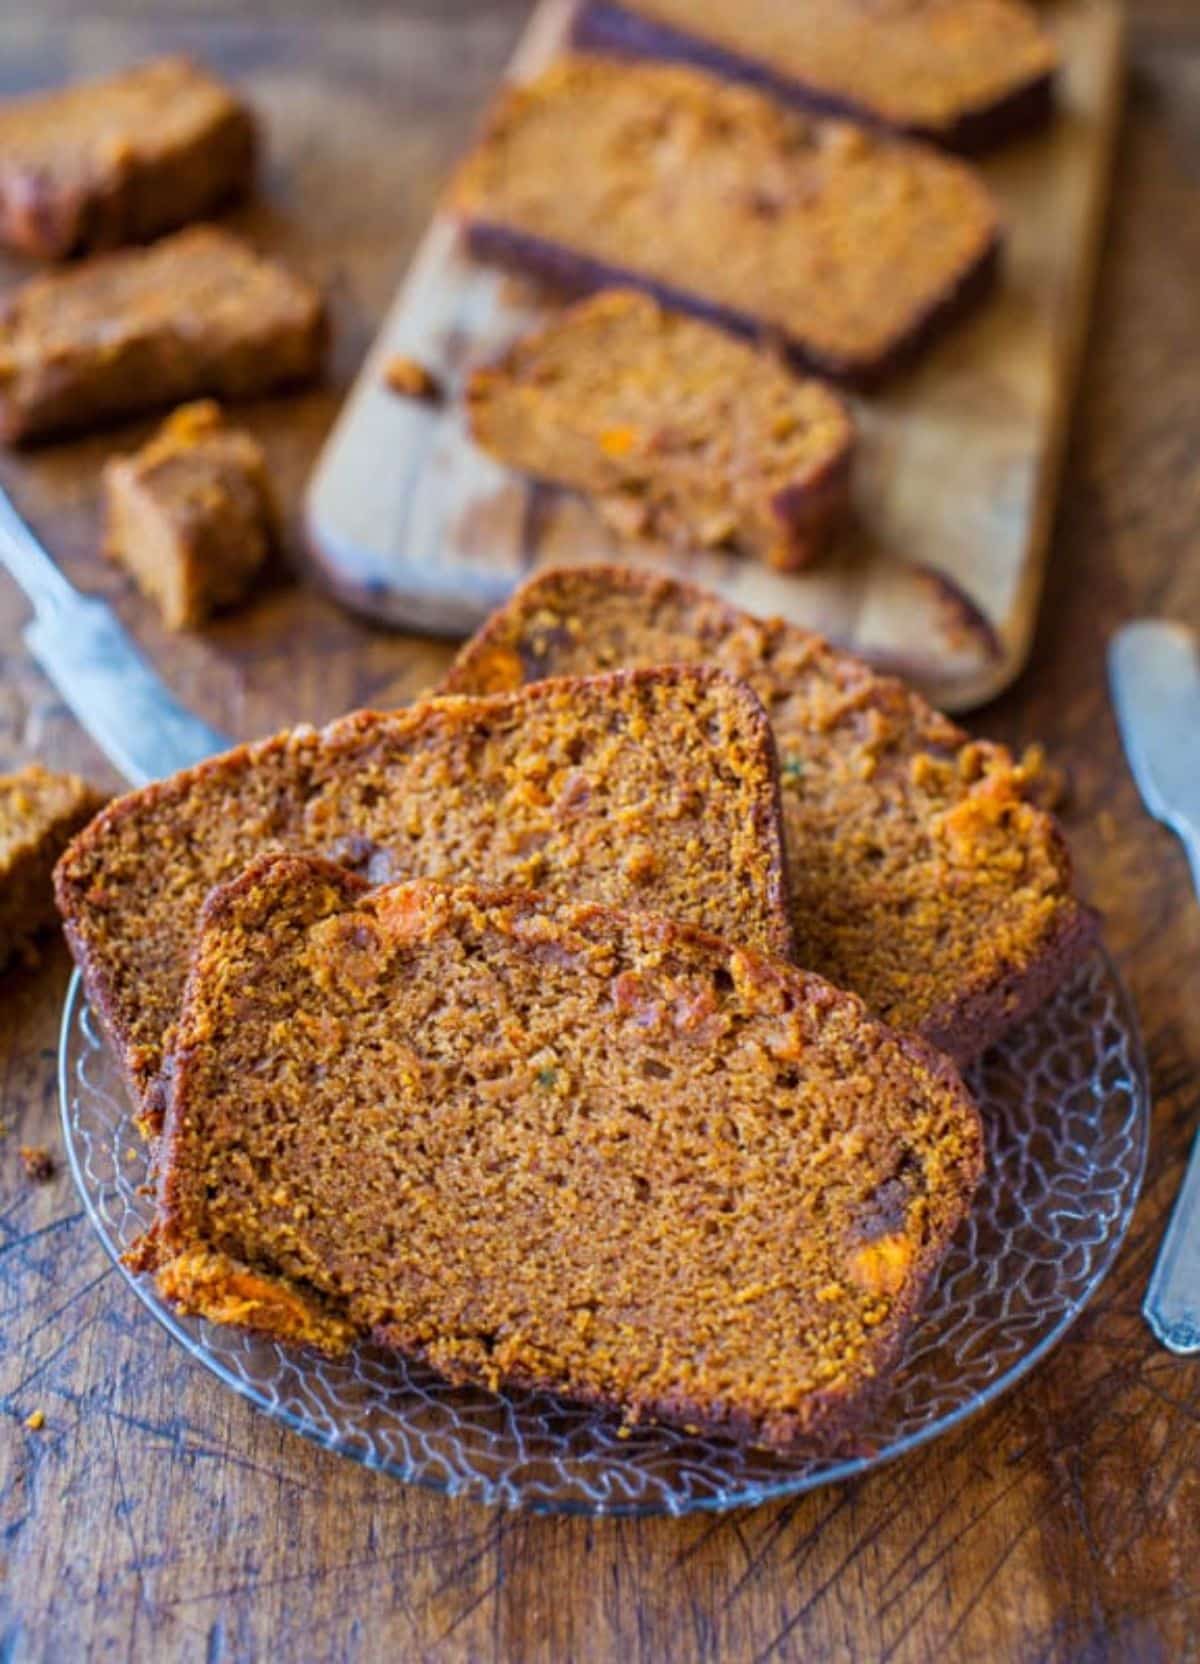 Three slices of Cinnamon and Spice Sweet Potato Bread on a glass plate.